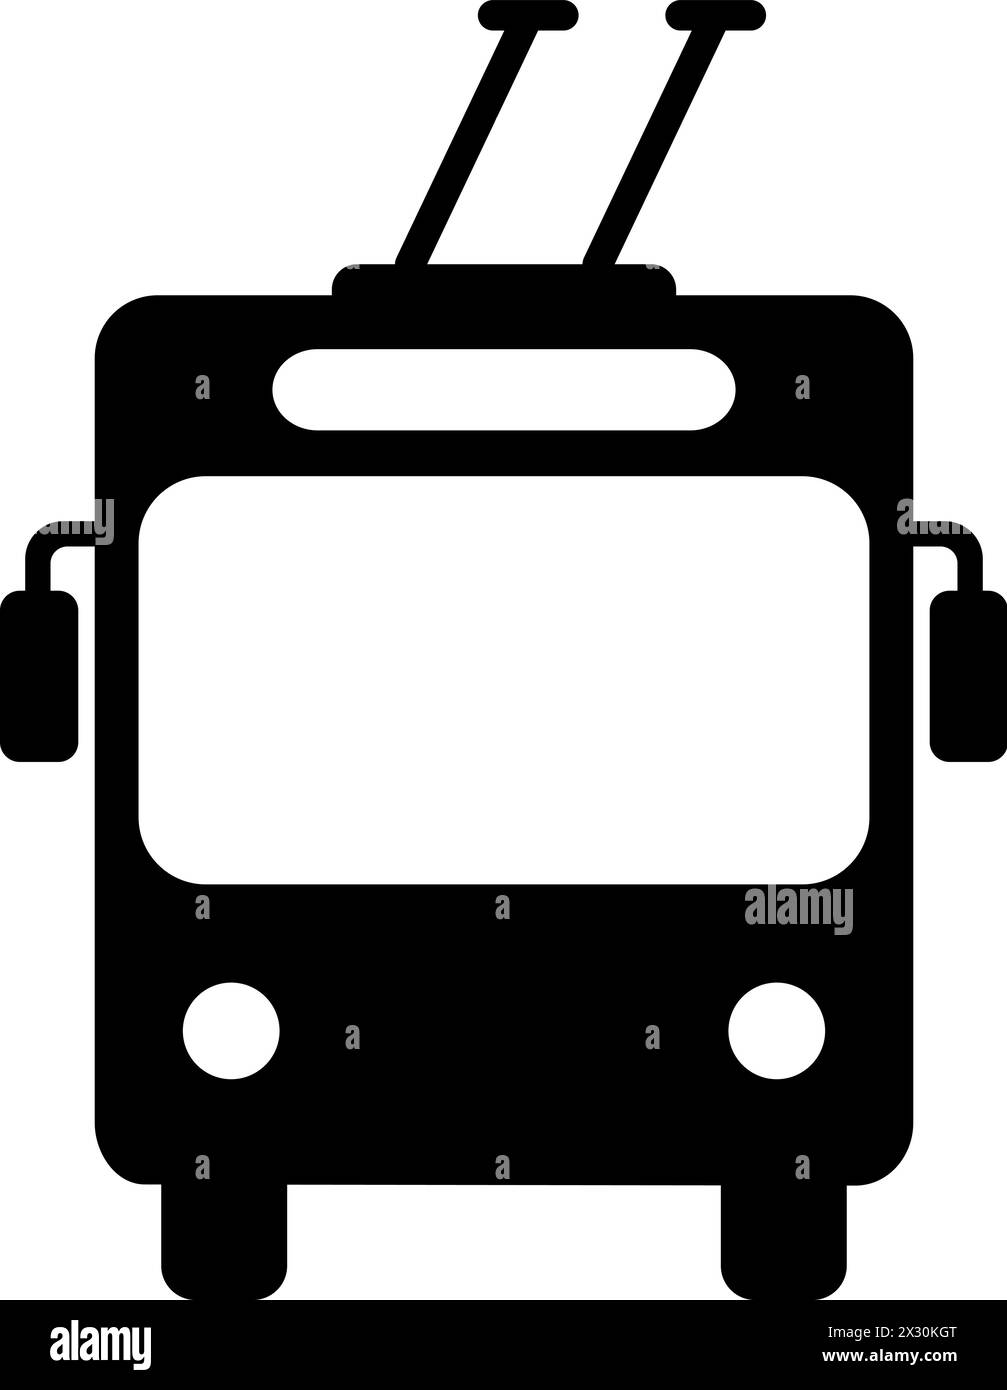 Flat trolleybus icon as symbol for web page design of passenger transportation transport Stock Vector